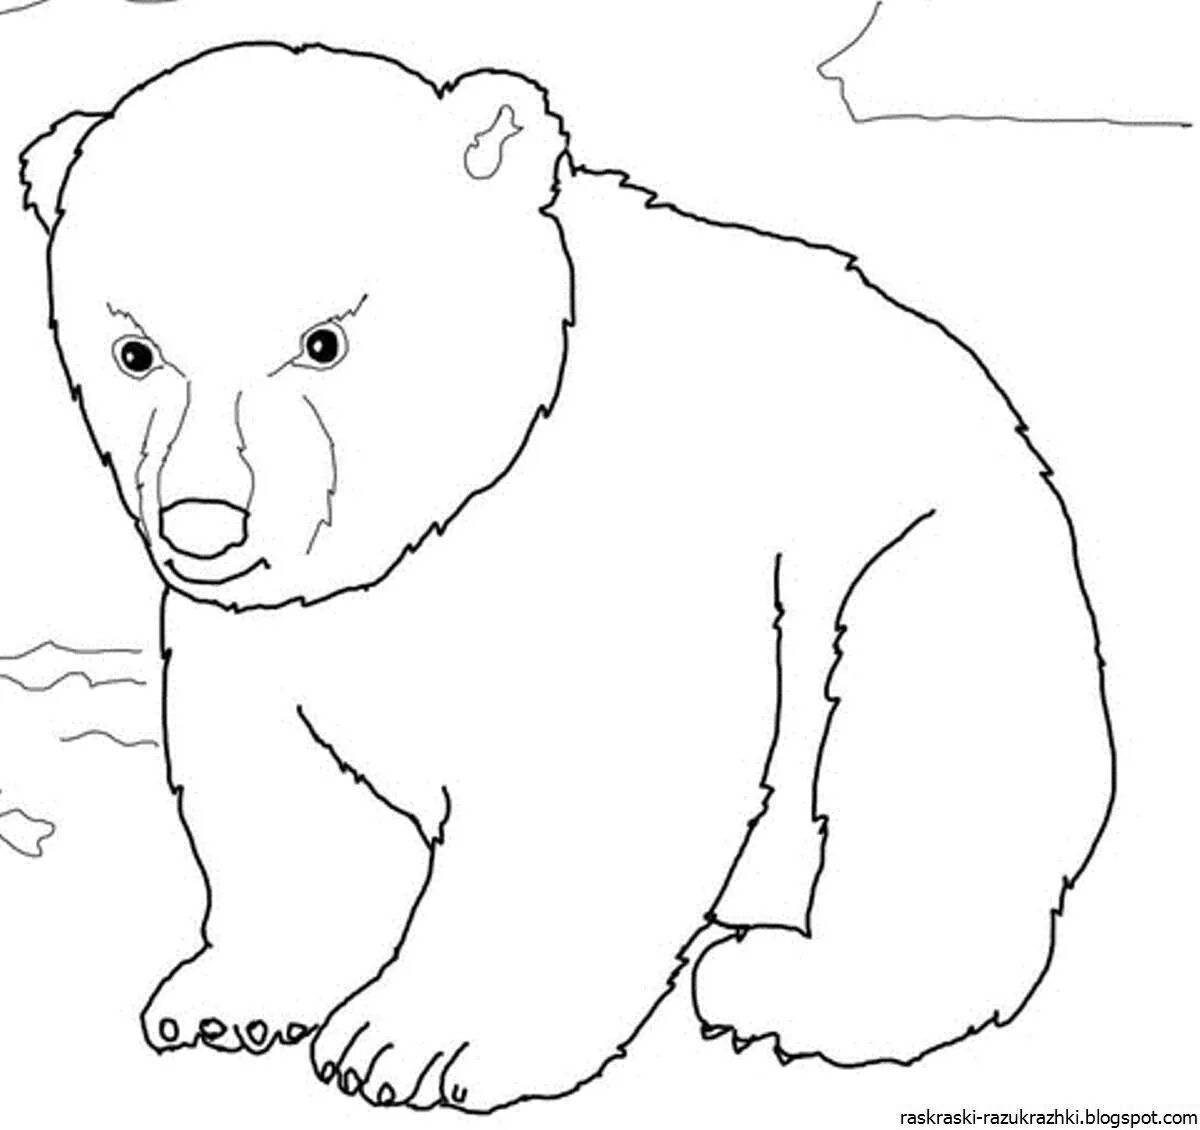 Coloring page adorable white and brown bear